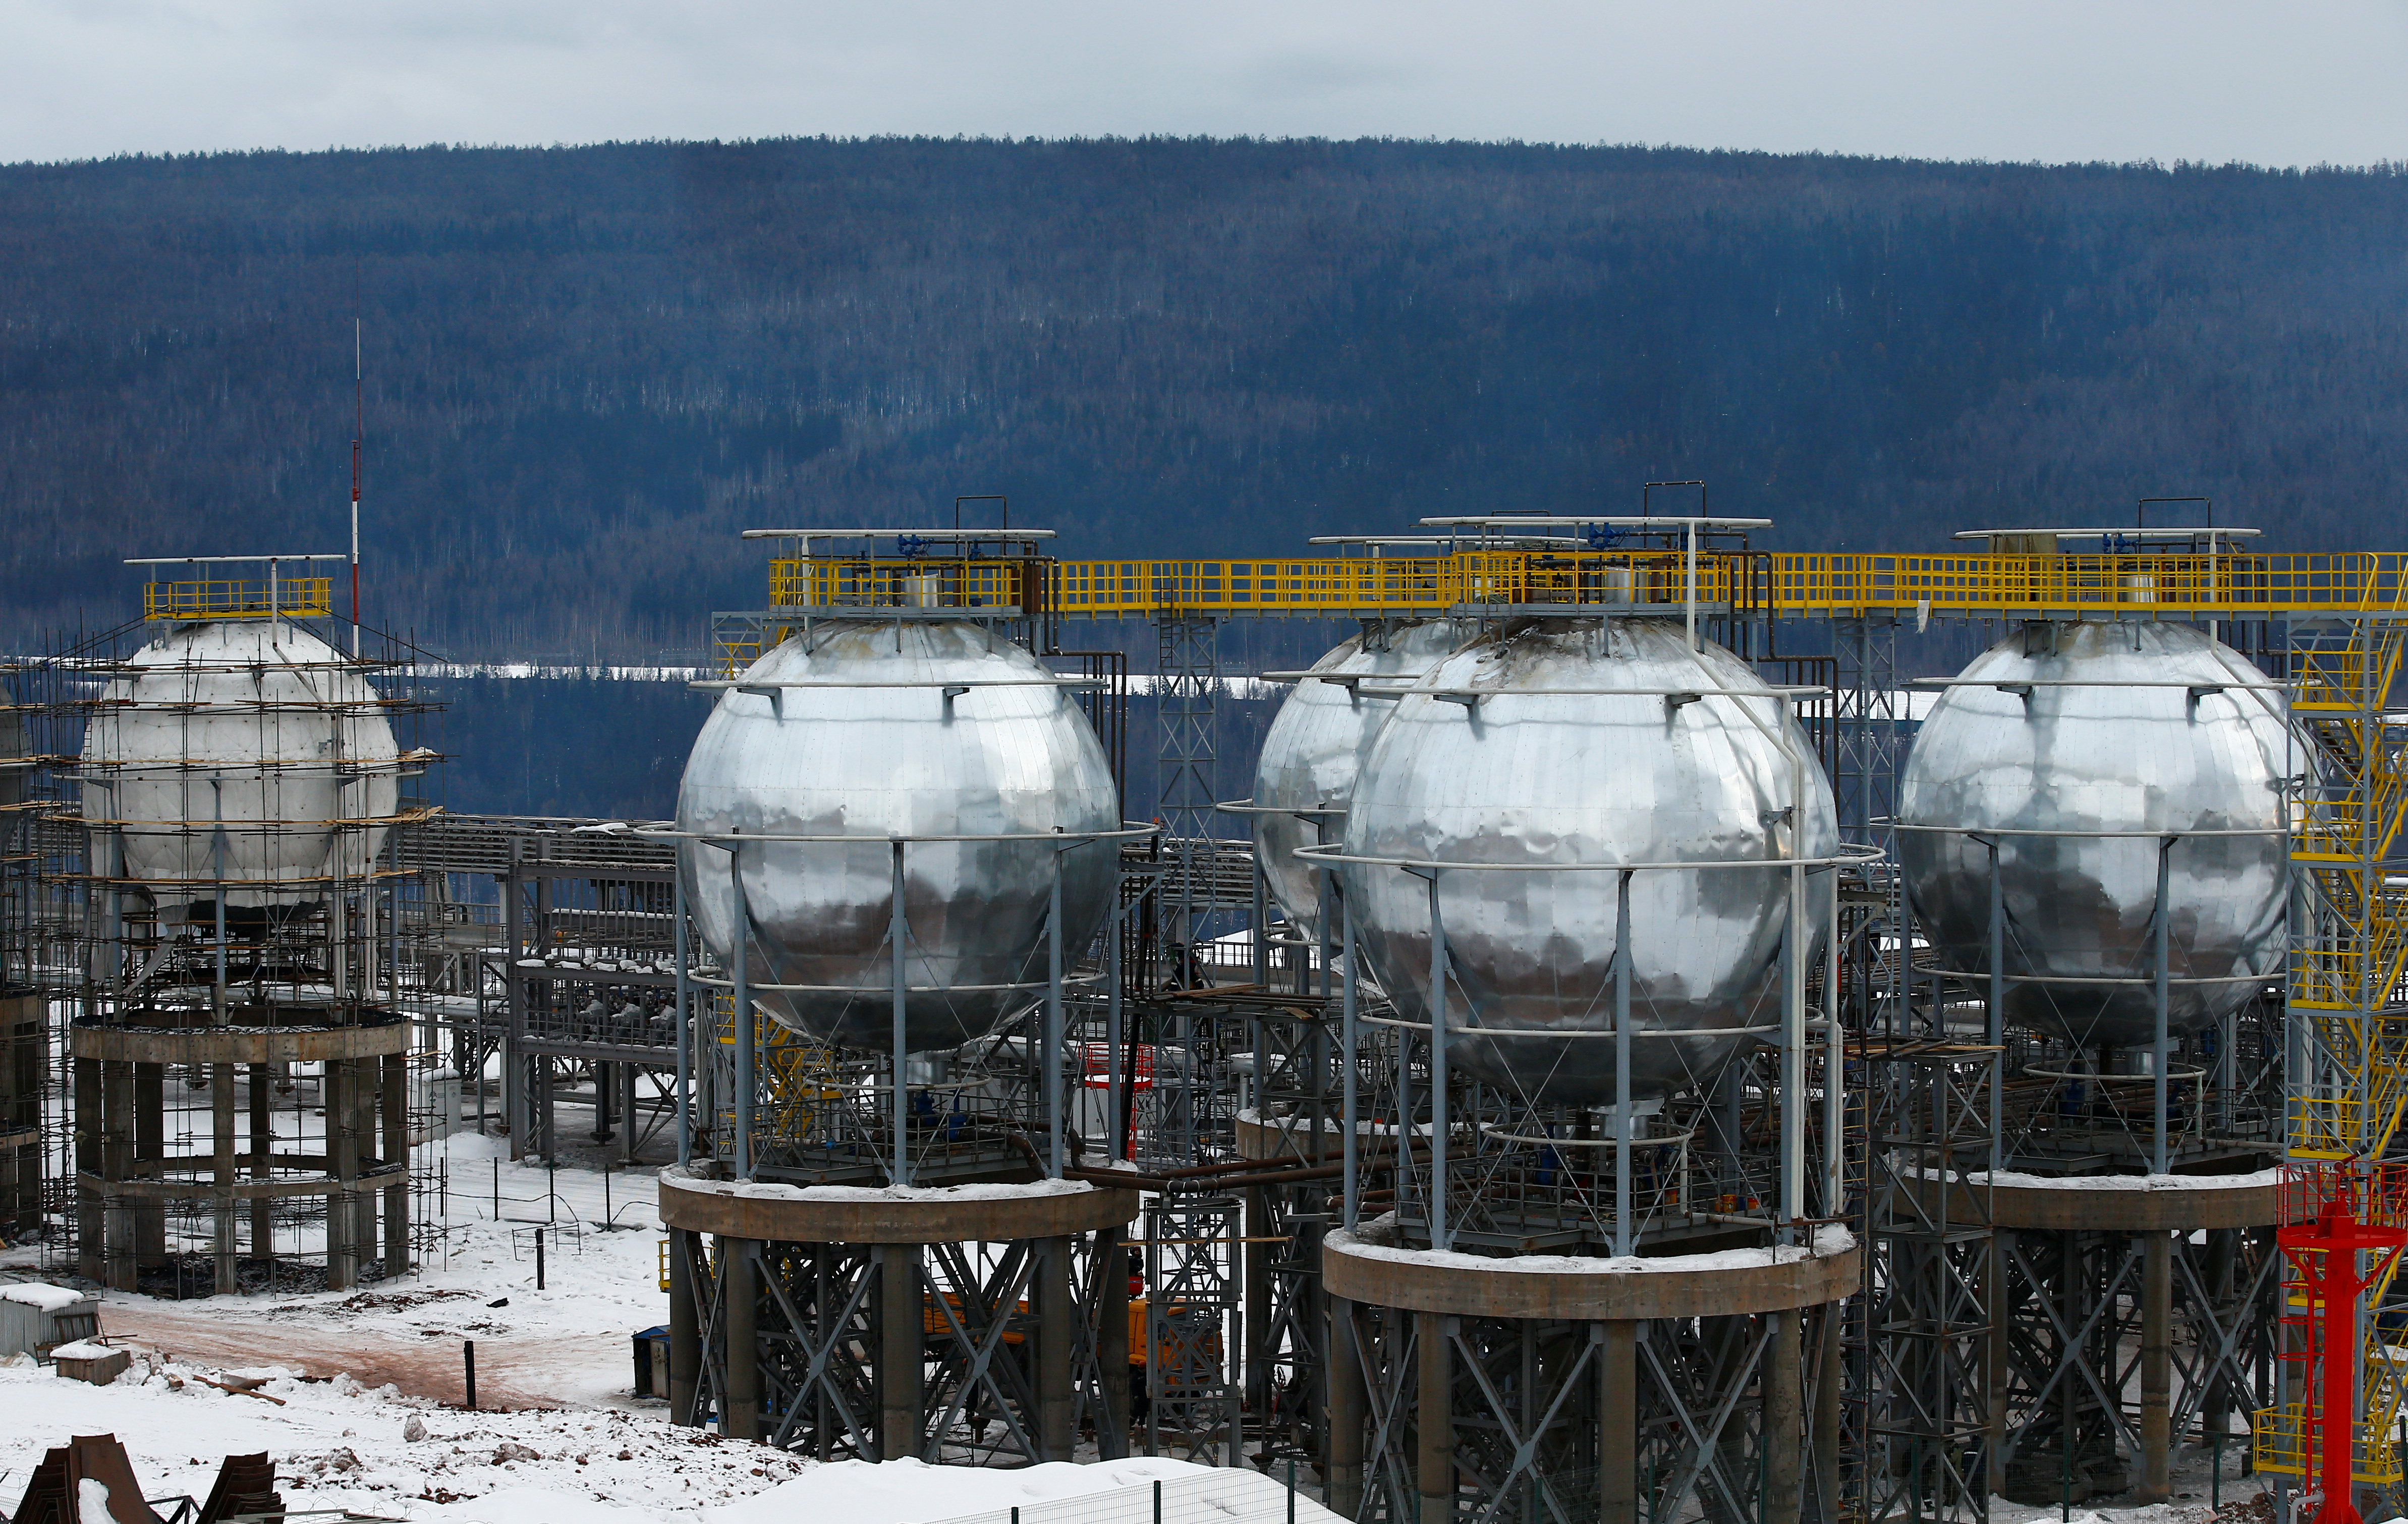 A view shows tanks for liquefied petroleum gases (LPG) at an Irkutsk Oil Company-owned facility in Irkutsk Region